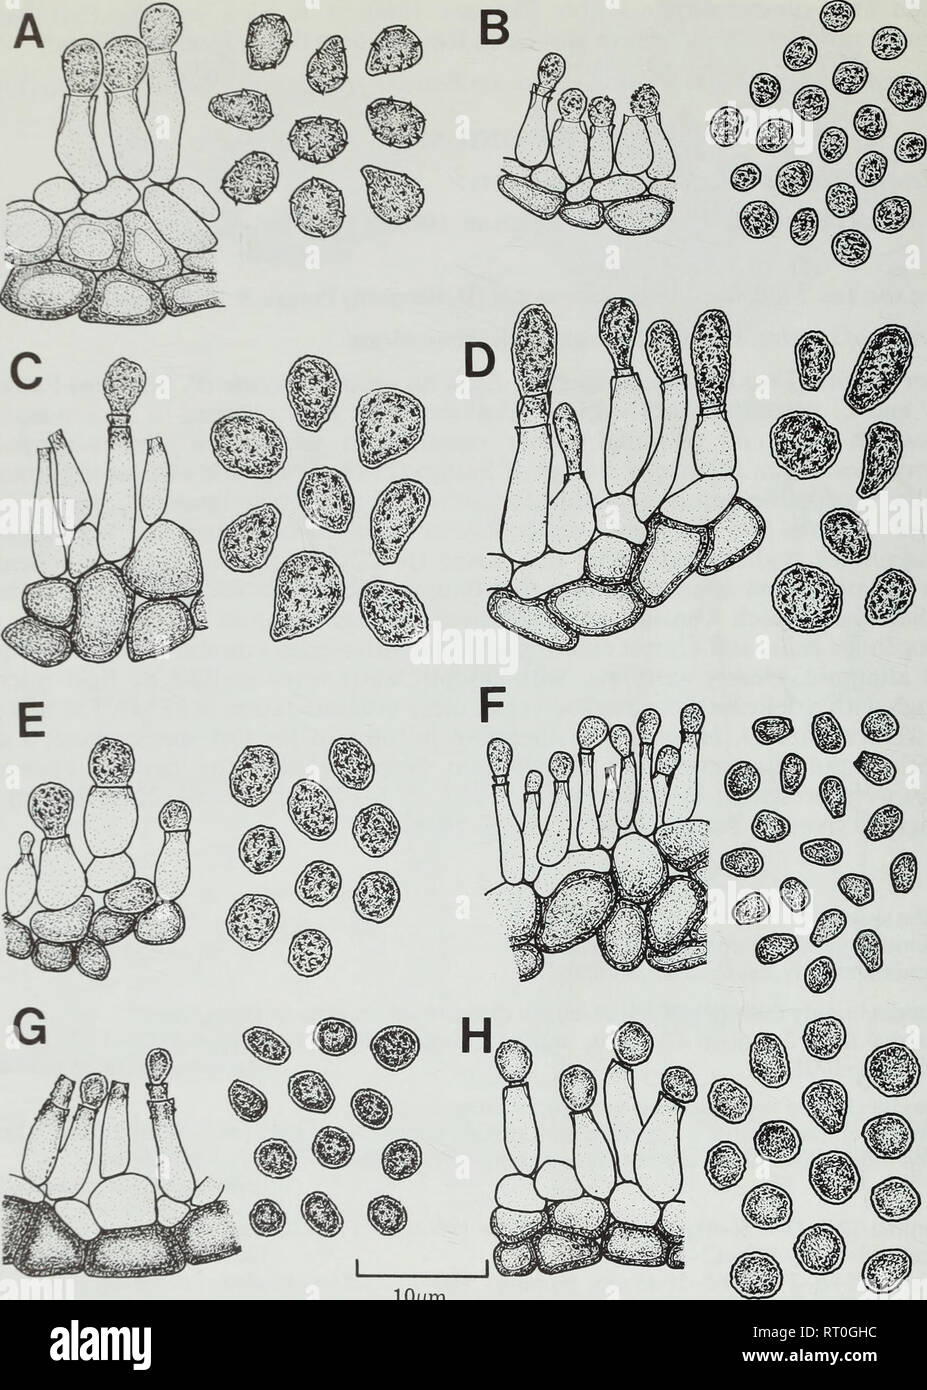 . Bulletin of the British Museum (Natural History). Botany; Botany. 34 D. L. HAWKSWORTH B. lOjLim Fig. 18 Lichenoconium species, conidiogenous cells and conidia. A, L. echinosporum (UPS—holotype). B, L. erodens (herb. Christiansen—holotype). C, L. cargillianum (E—holotype). D, L. lichenicola (H-KARST 1246—holotype). E, L. lecanorae (IMI 192264). F, I. pyxidatae (L—holotype). G, L. usneae (K—isotype). H, L. xanthoriae (C—holotype). Reproduced from Hawksworth (1977 : 162, 164).. Please note that these images are extracted from scanned page images that may have been digitally enhanced for readabi Stock Photo